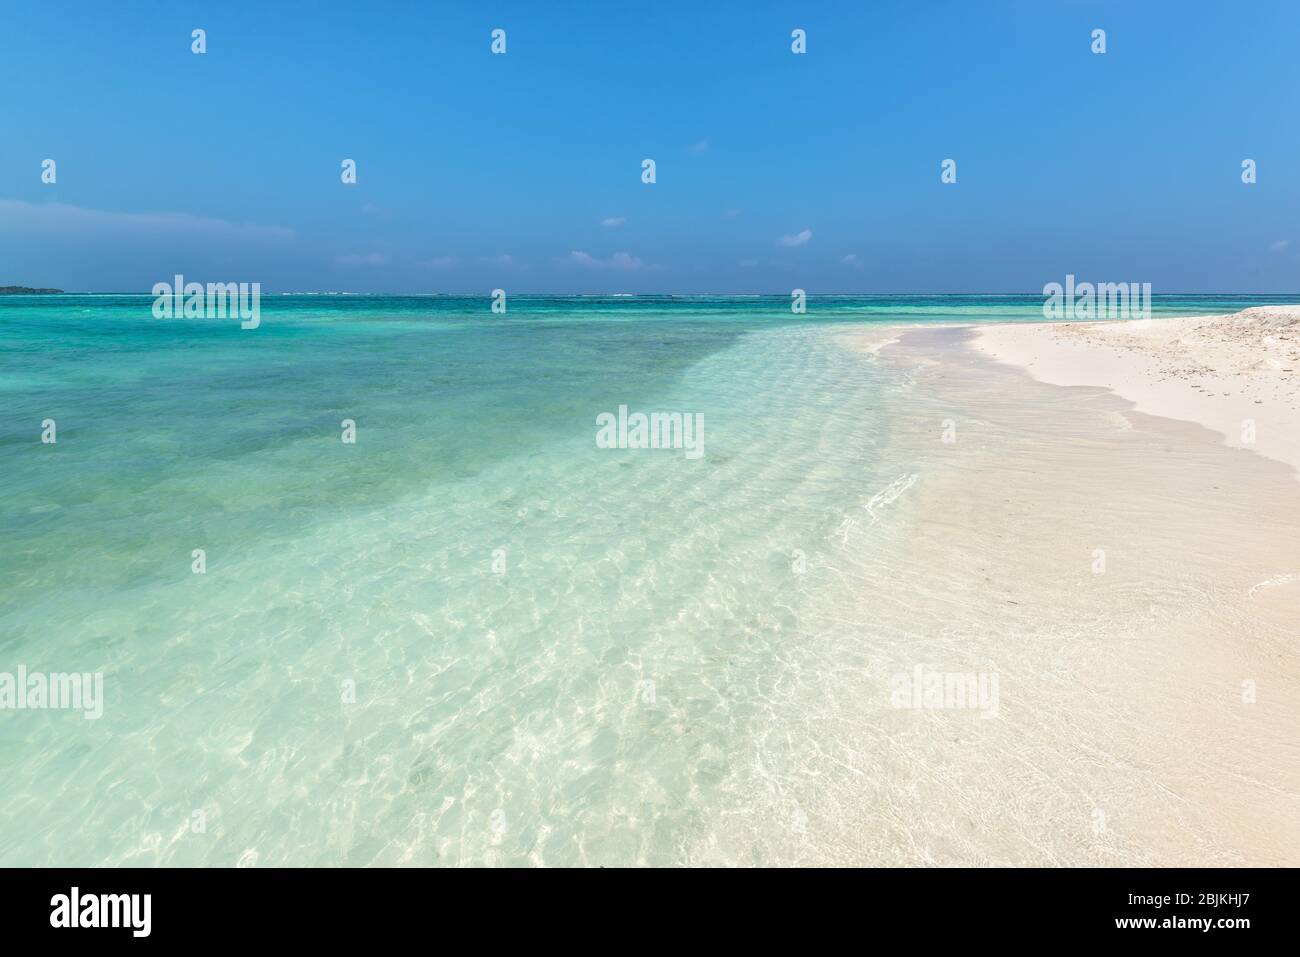 Amazing empty wild sandy beach with turquoise water. Picturesque seascape with blue sky. Maafushi Island, Maldives, Indian Ocean. Stock Photo